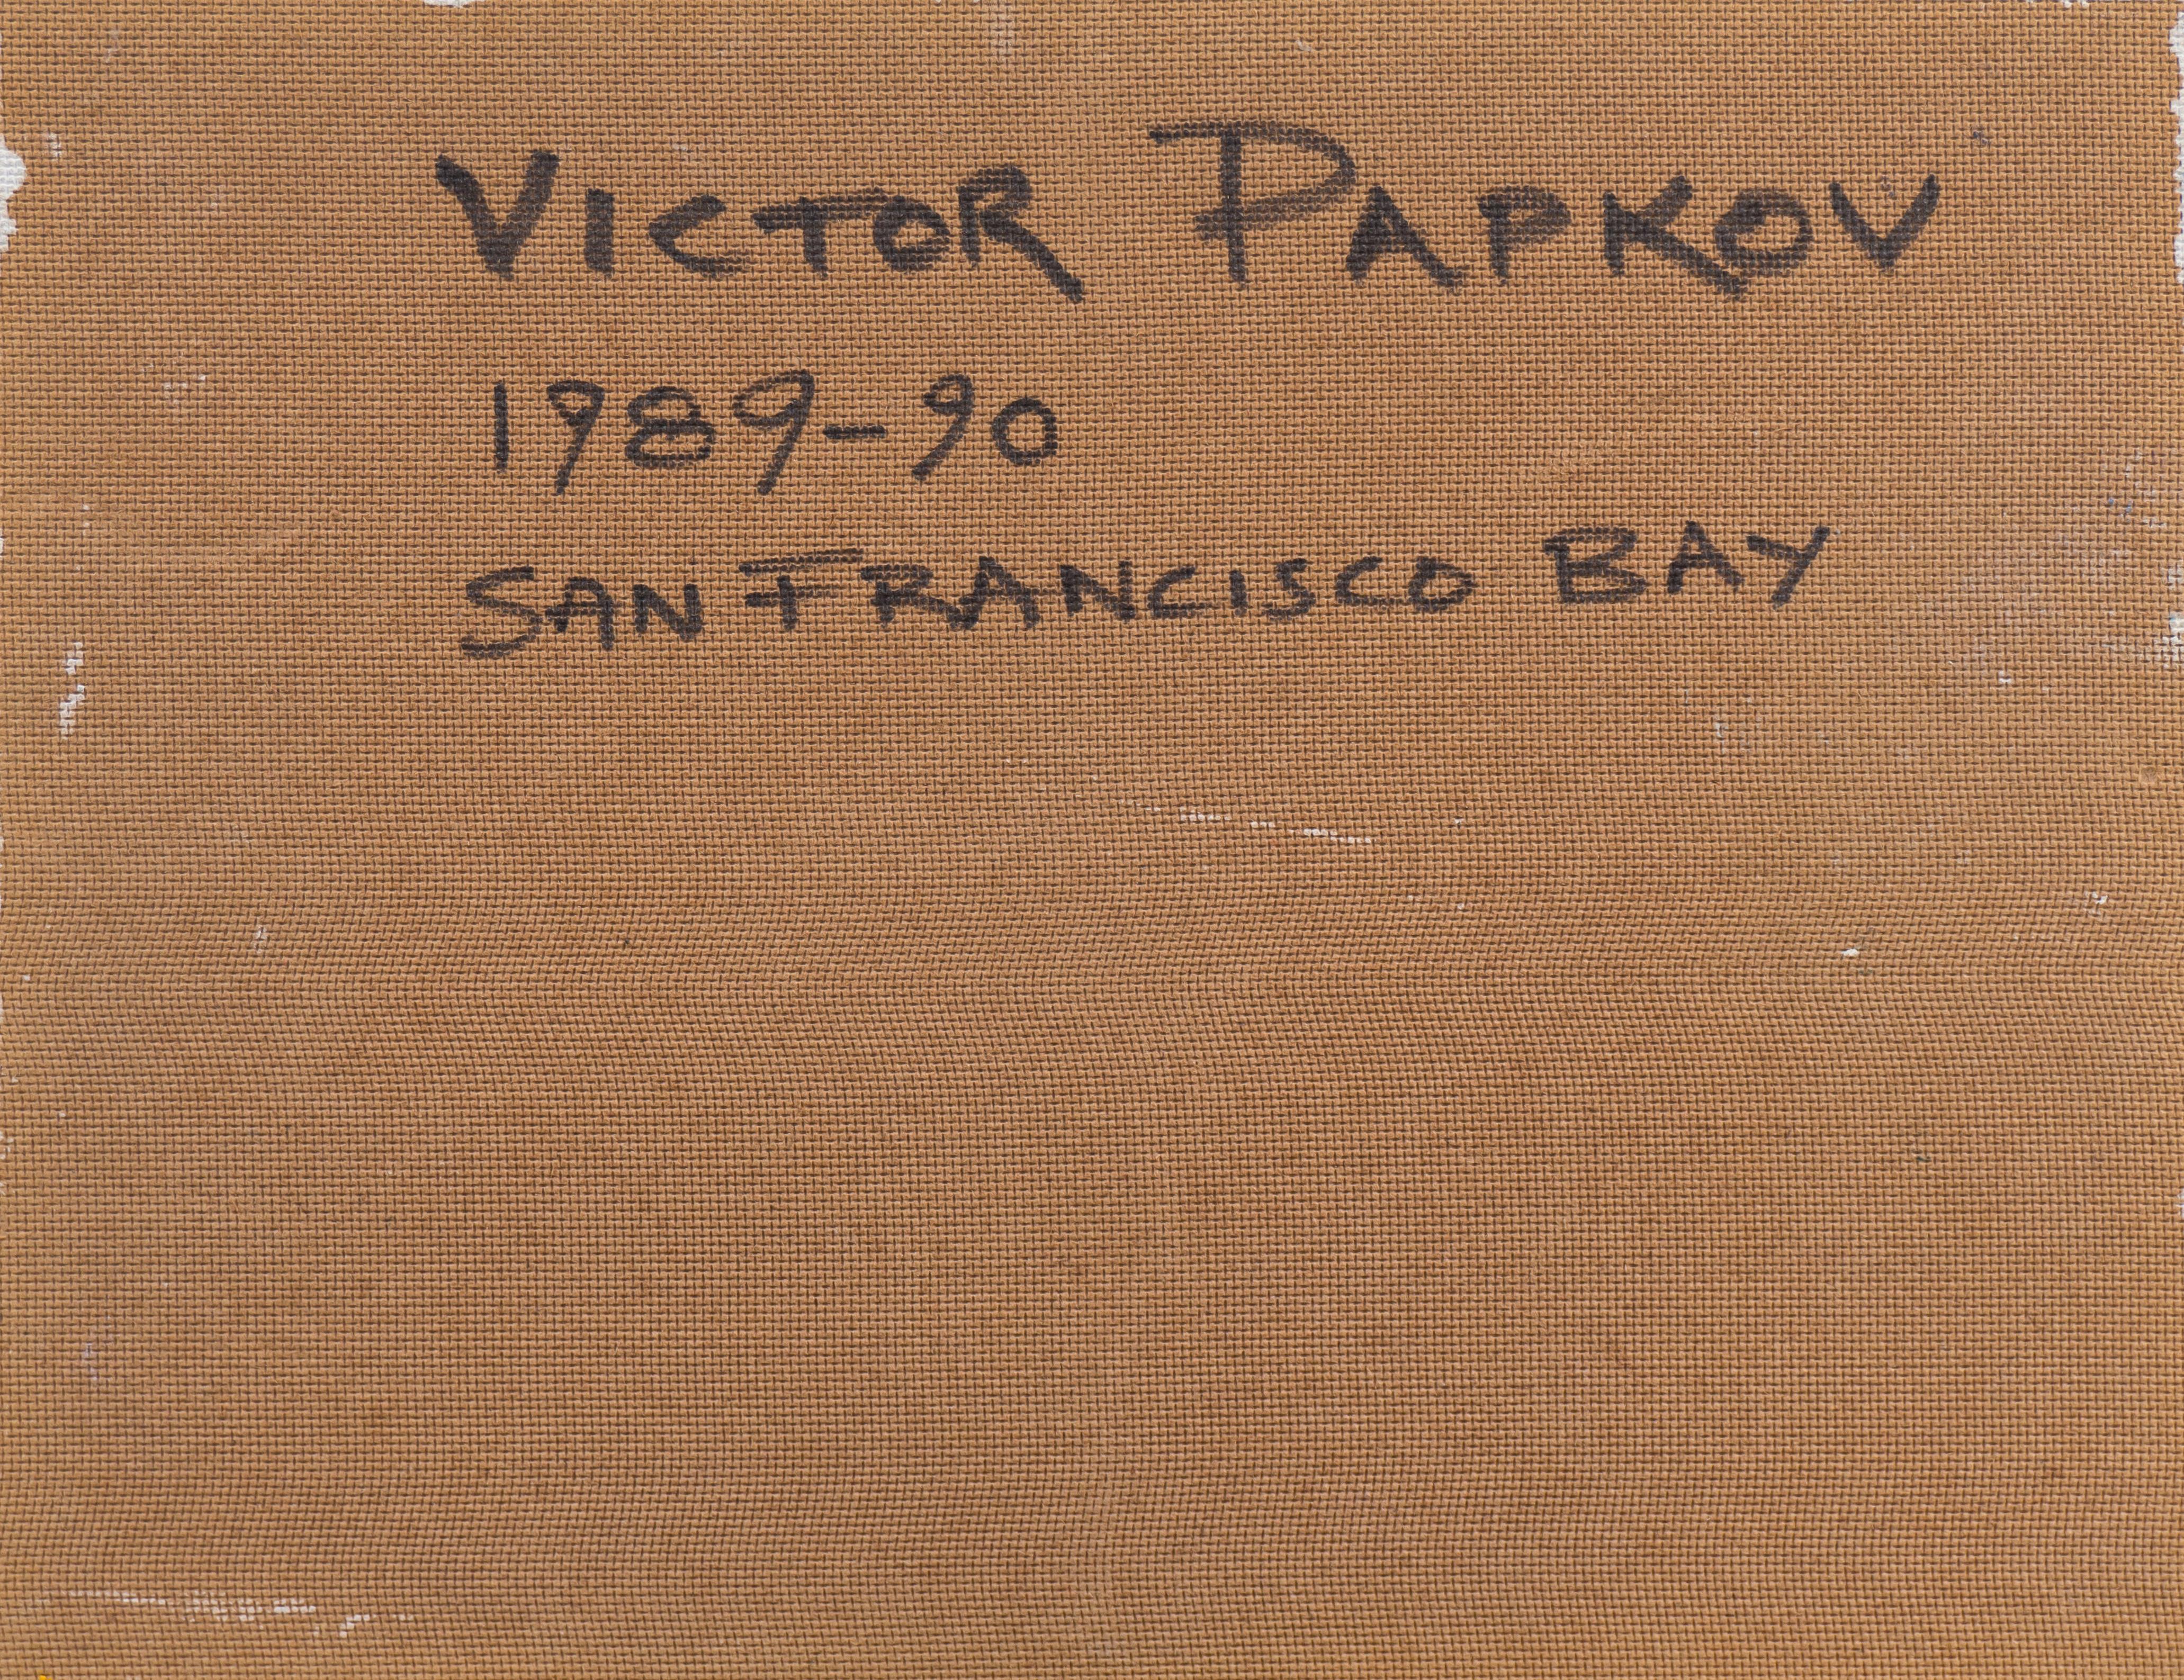 Signed lower right, 'V. Papkov' for Victor Papkov (Russian-American, 20th century); inscribed verso with artist name, dated 1989-1990 and titled, 'San Francisco Bay'. 

A dramatic Impressionist oil seascape showing late sunset off the San Francisco